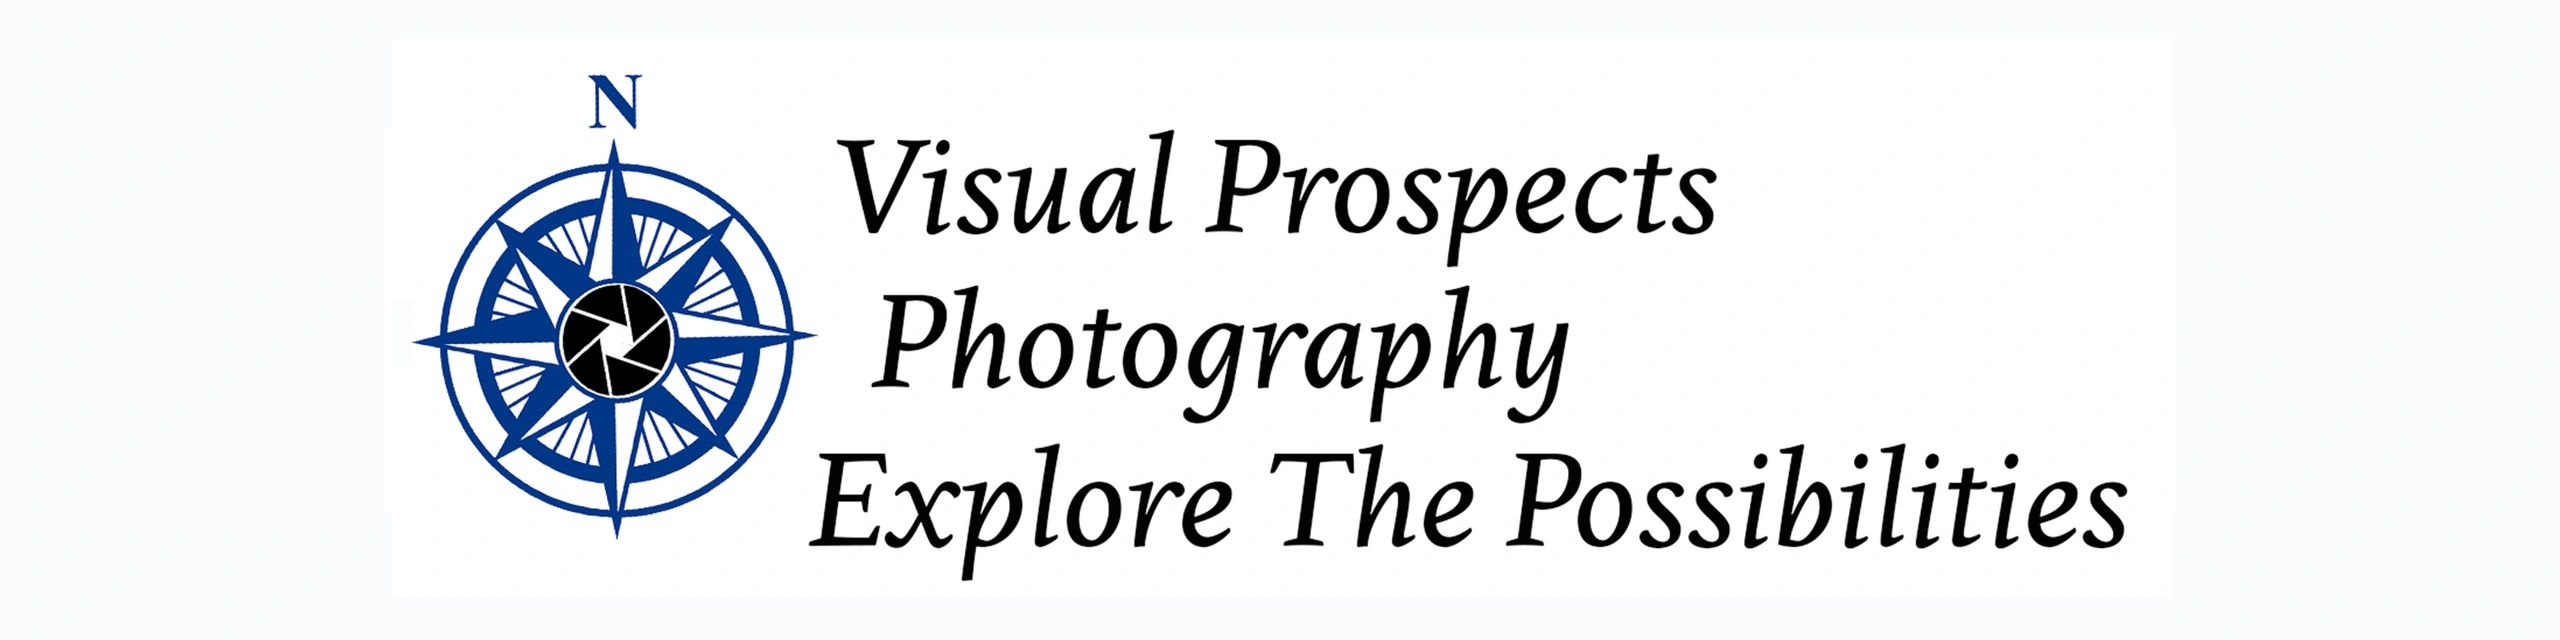 Visual Prospects Photography